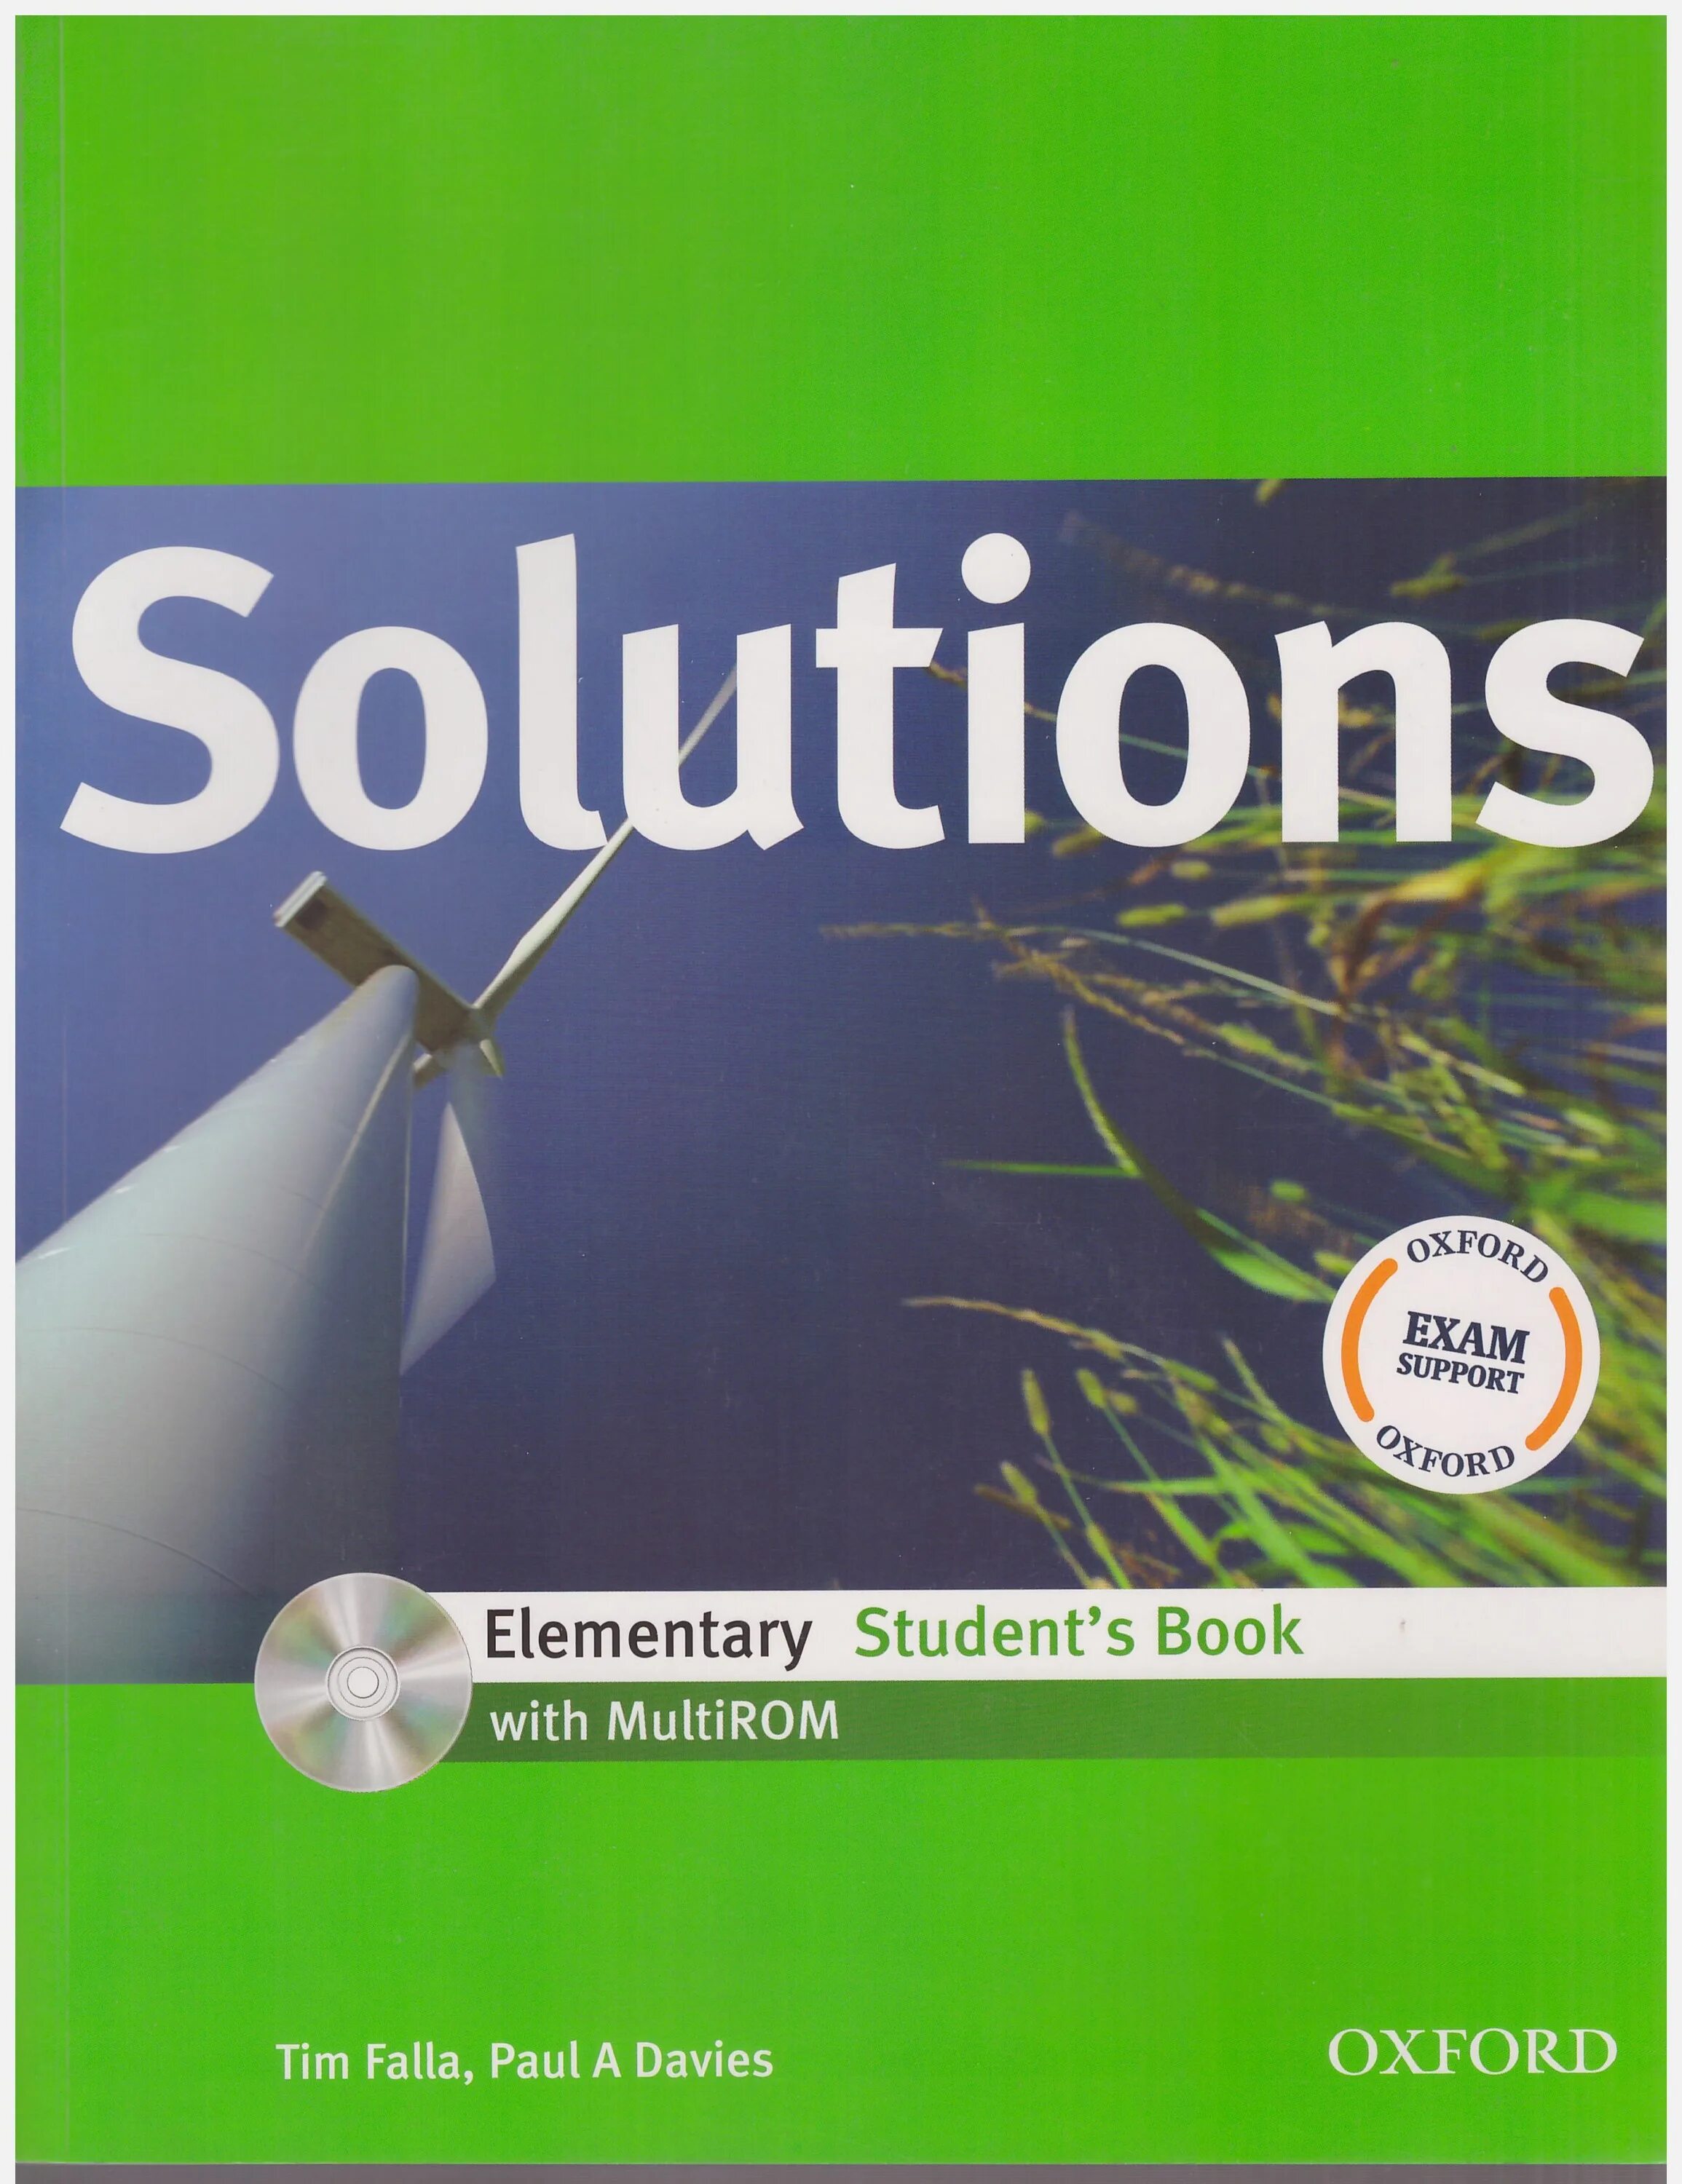 Oxford third Edition solutions Elementary student's book Paul Adavies tim Falla ответы. Solutions Elementary Workbook гдз. Английский язык тим Фалла аудиозаписи. Английский язык 5 класс solutions elementary